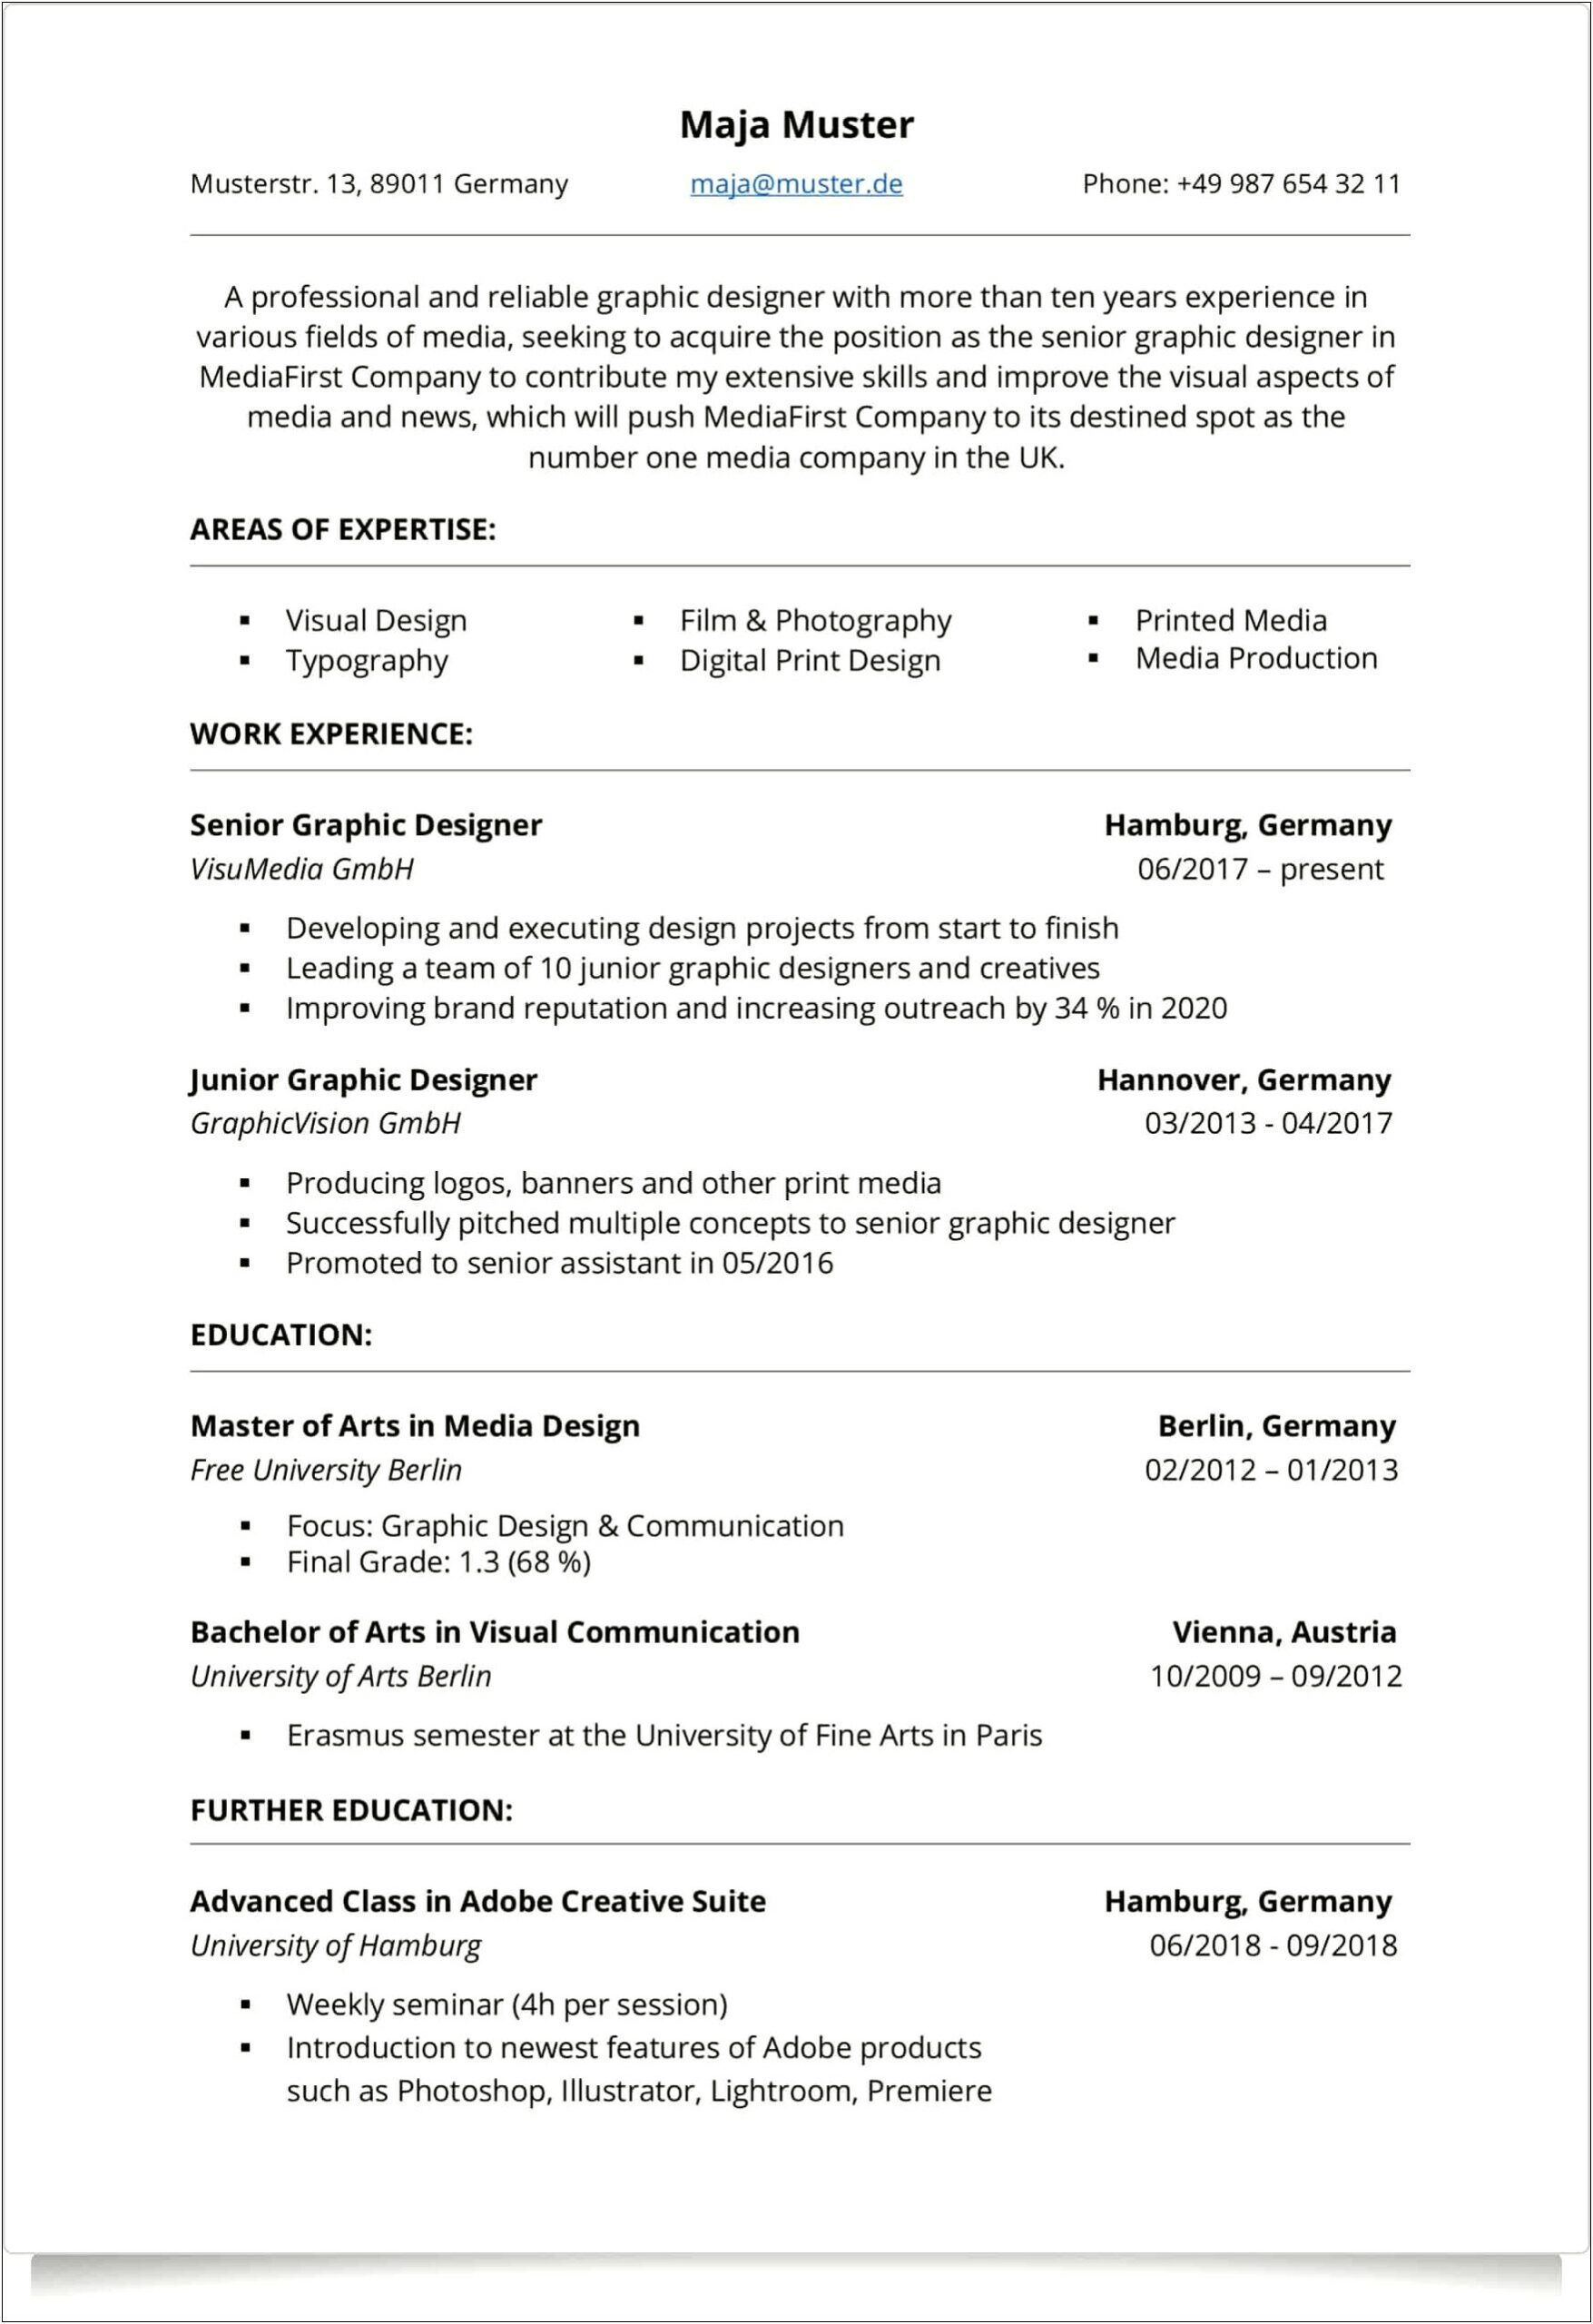 Acquired Company Resume Example 2018